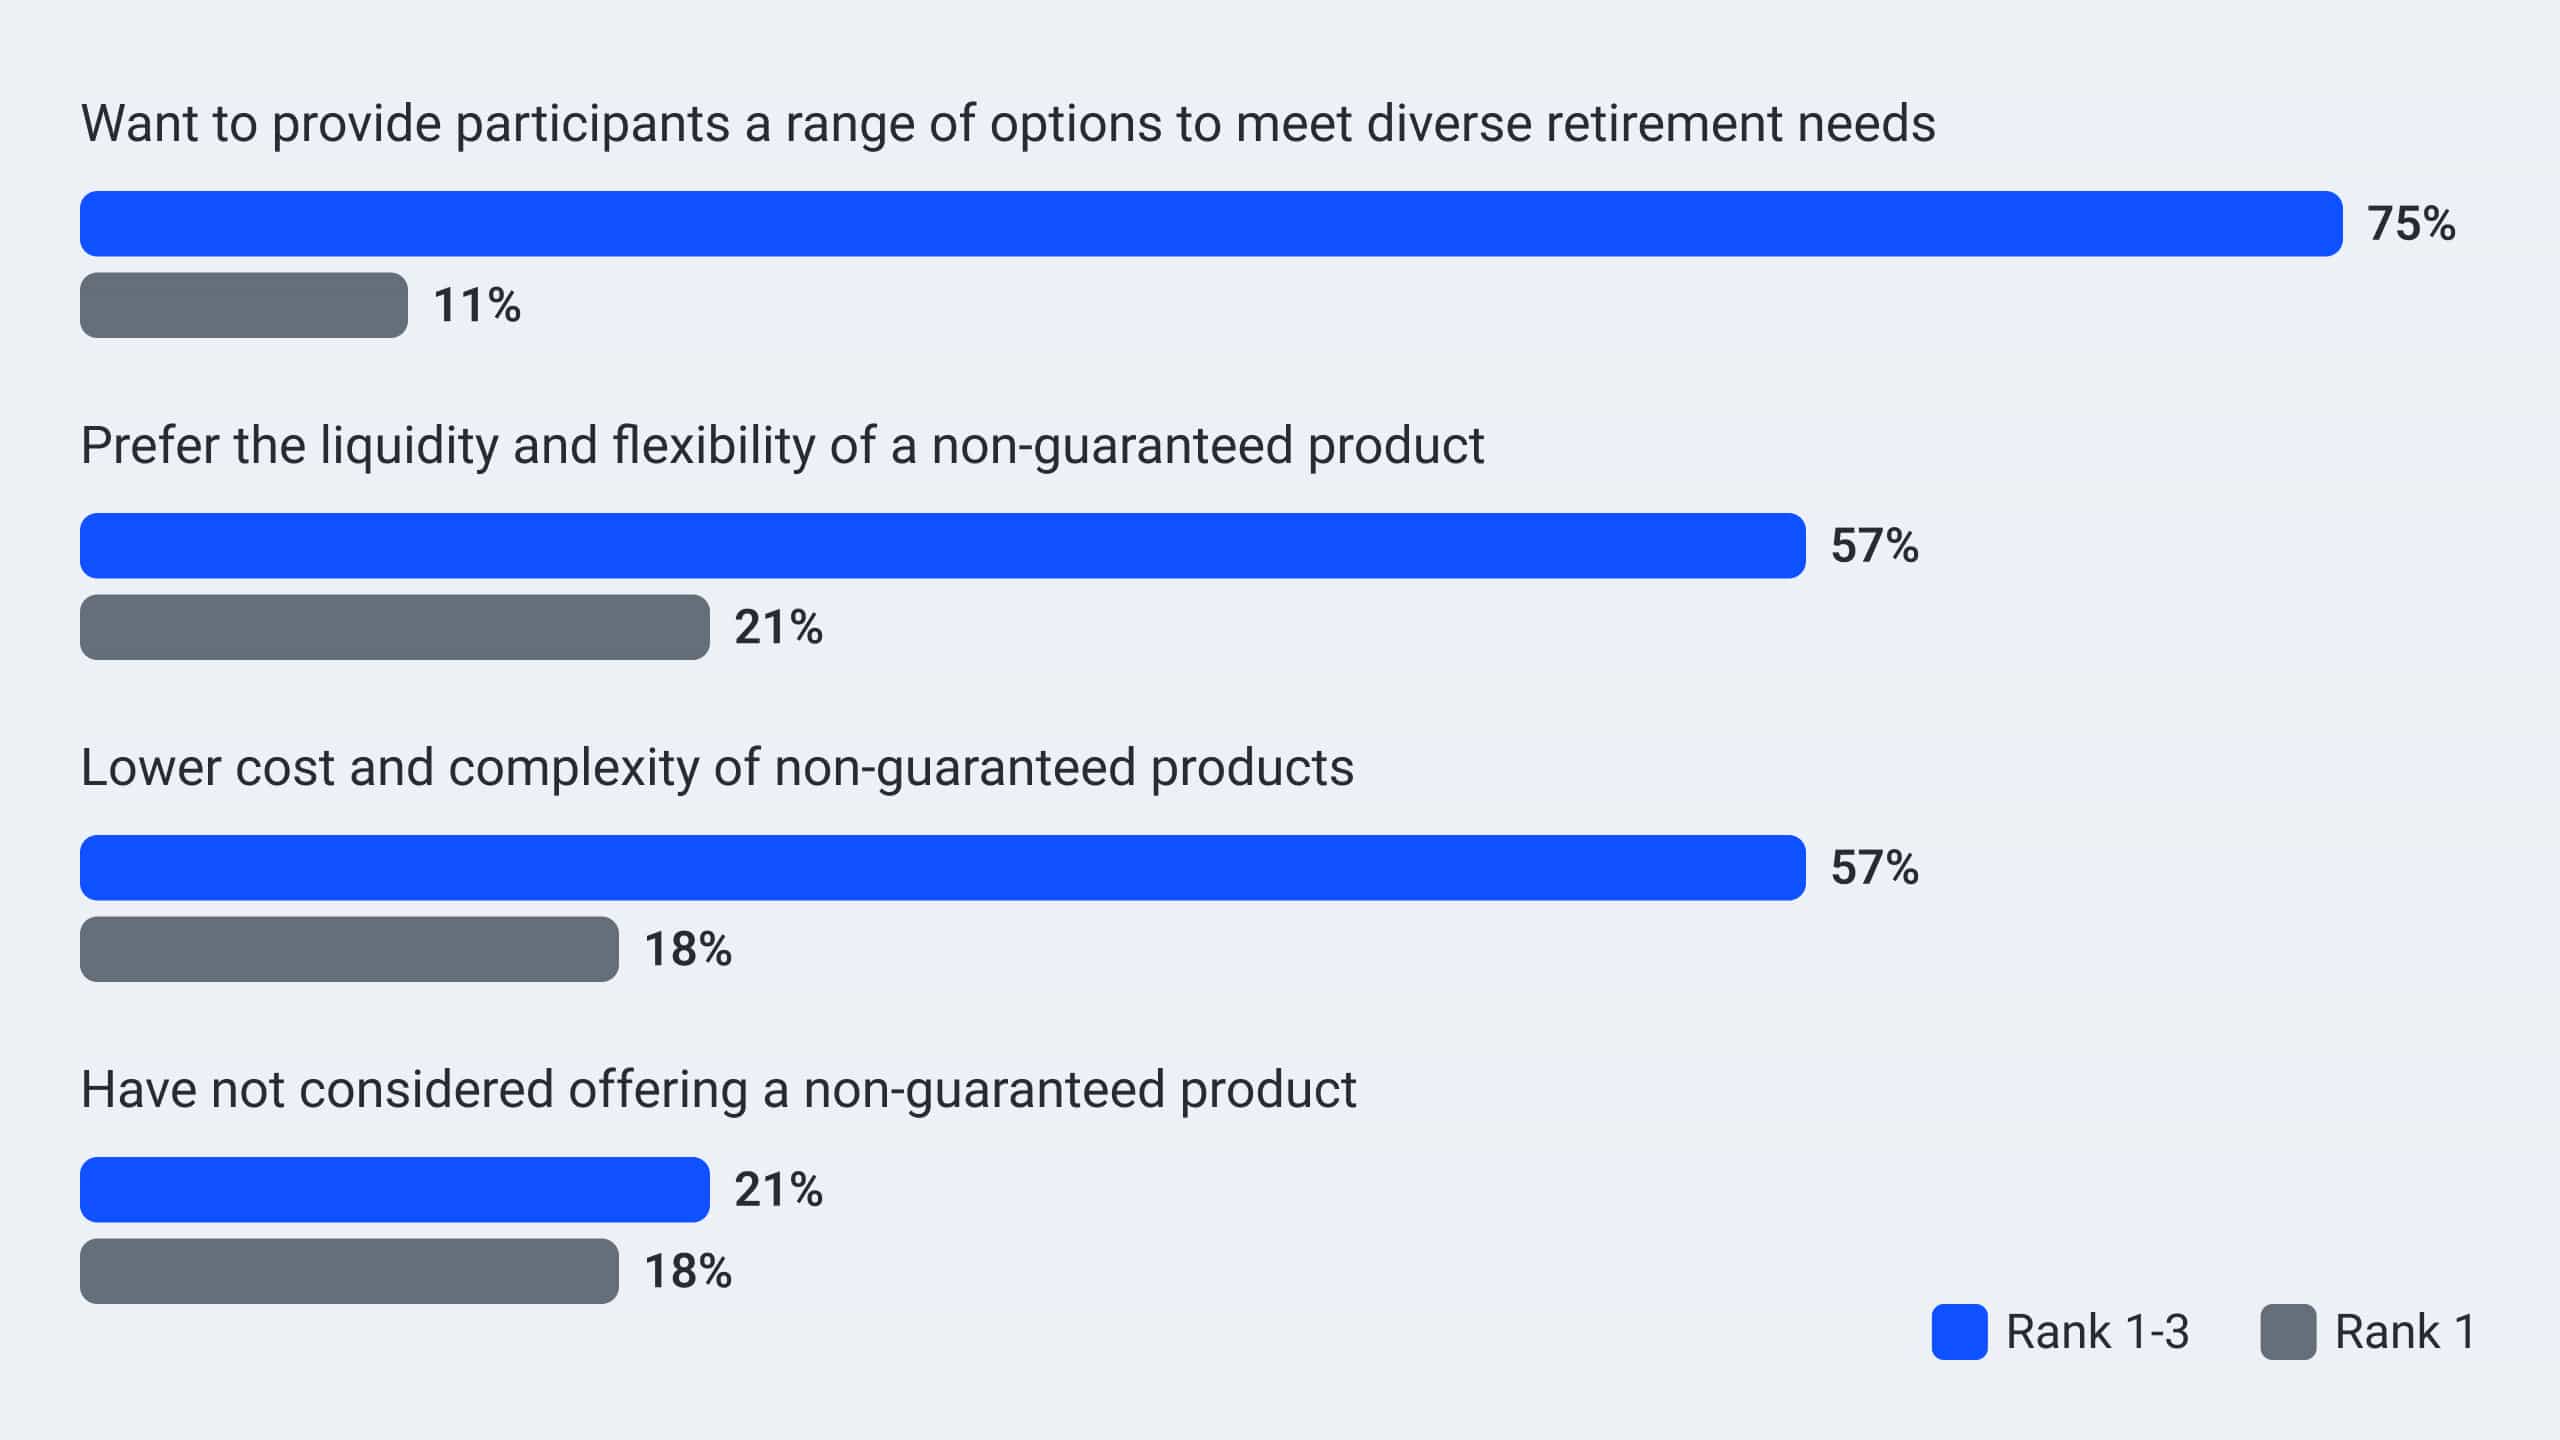 A bar chart shows the data from the answers to the following question: What are the top reasons why plan sponsors have considered or implemented non-guaranteed retirement income solutions? Rank all in order of importance, where 1= most important. (n=28). The answers are as follows: Want to provide participants a range of options to meet diverse retirement needs – 75% ranked this 1-3, and 11% ranked this number 1; Prefer the liquidity and flexibility of a non-guaranteed product – 57% ranked this 1-3, and 21% ranked this number 1; Lower cost and complexity of non-guaranteed products – 57% ranked this 1-3, and 18% ranked this number 1; Have not considered a non-guaranteed product – 21% ranked this 1-3, and 18% ranked this number 1.